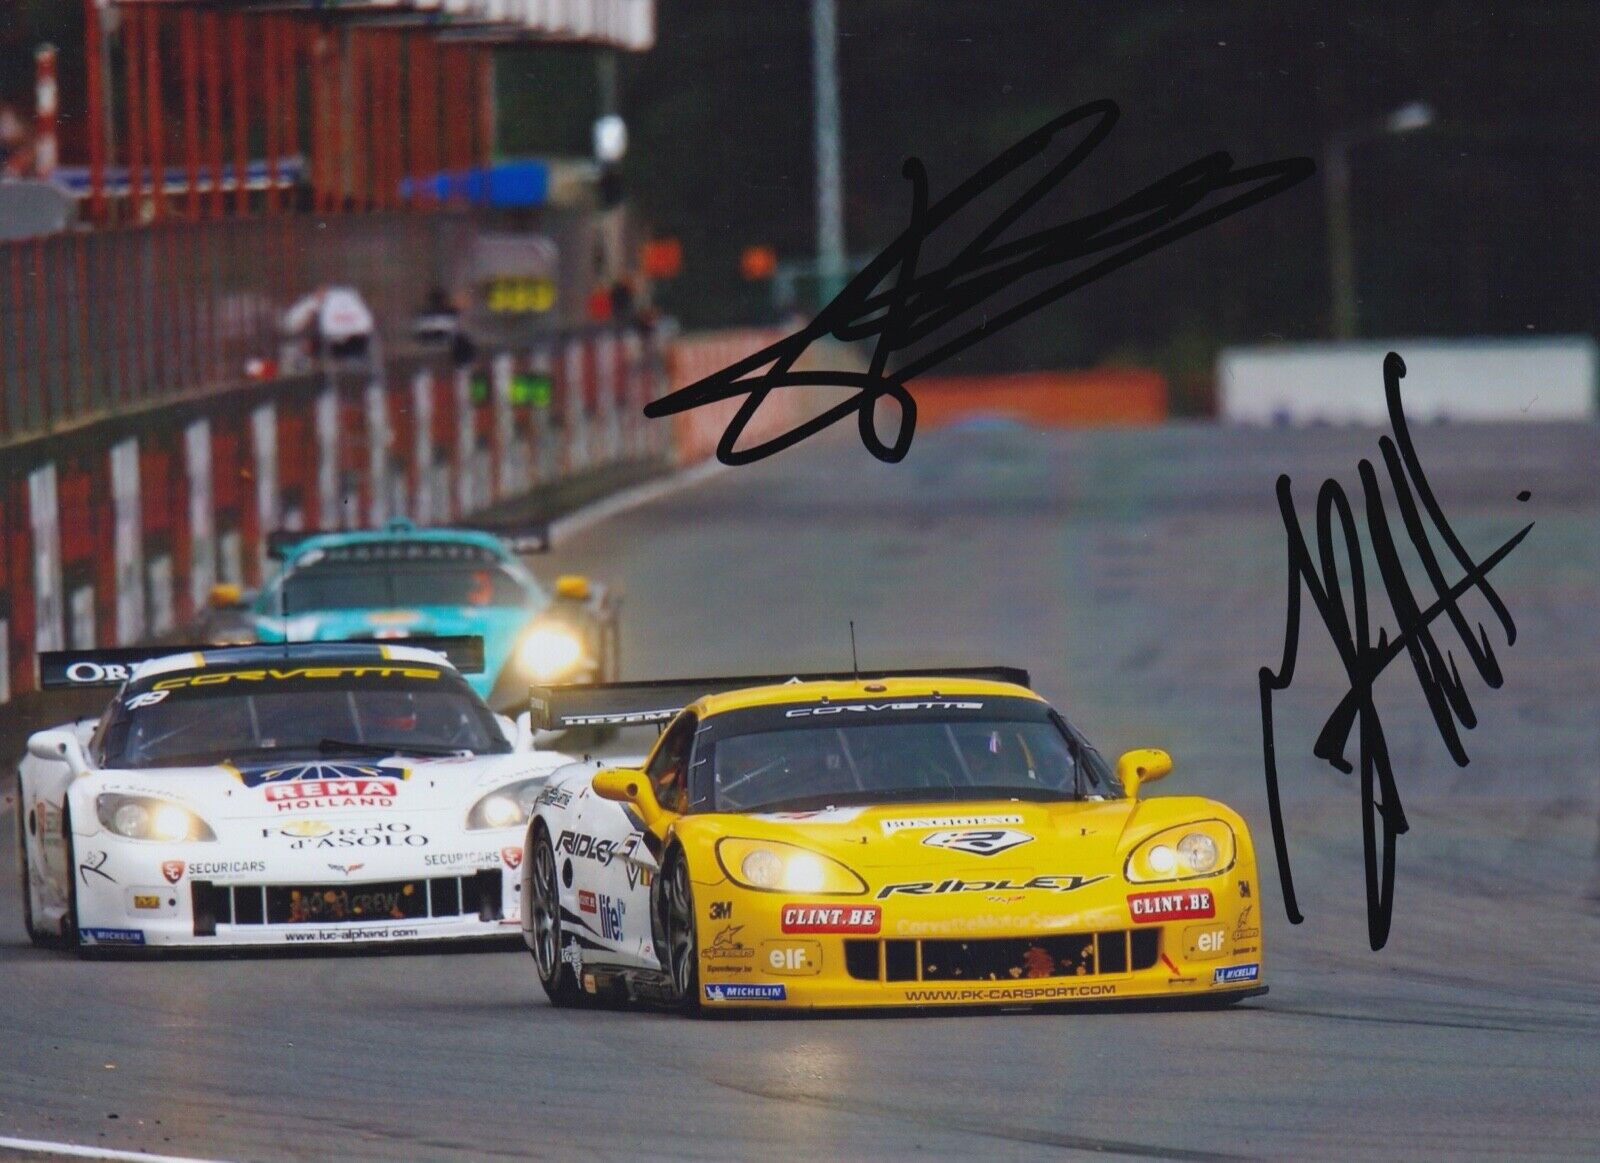 Anthony Kumpen and Mike Hezemans Hand Signed 7x5 Photo Poster painting - FIA GT Championship 10